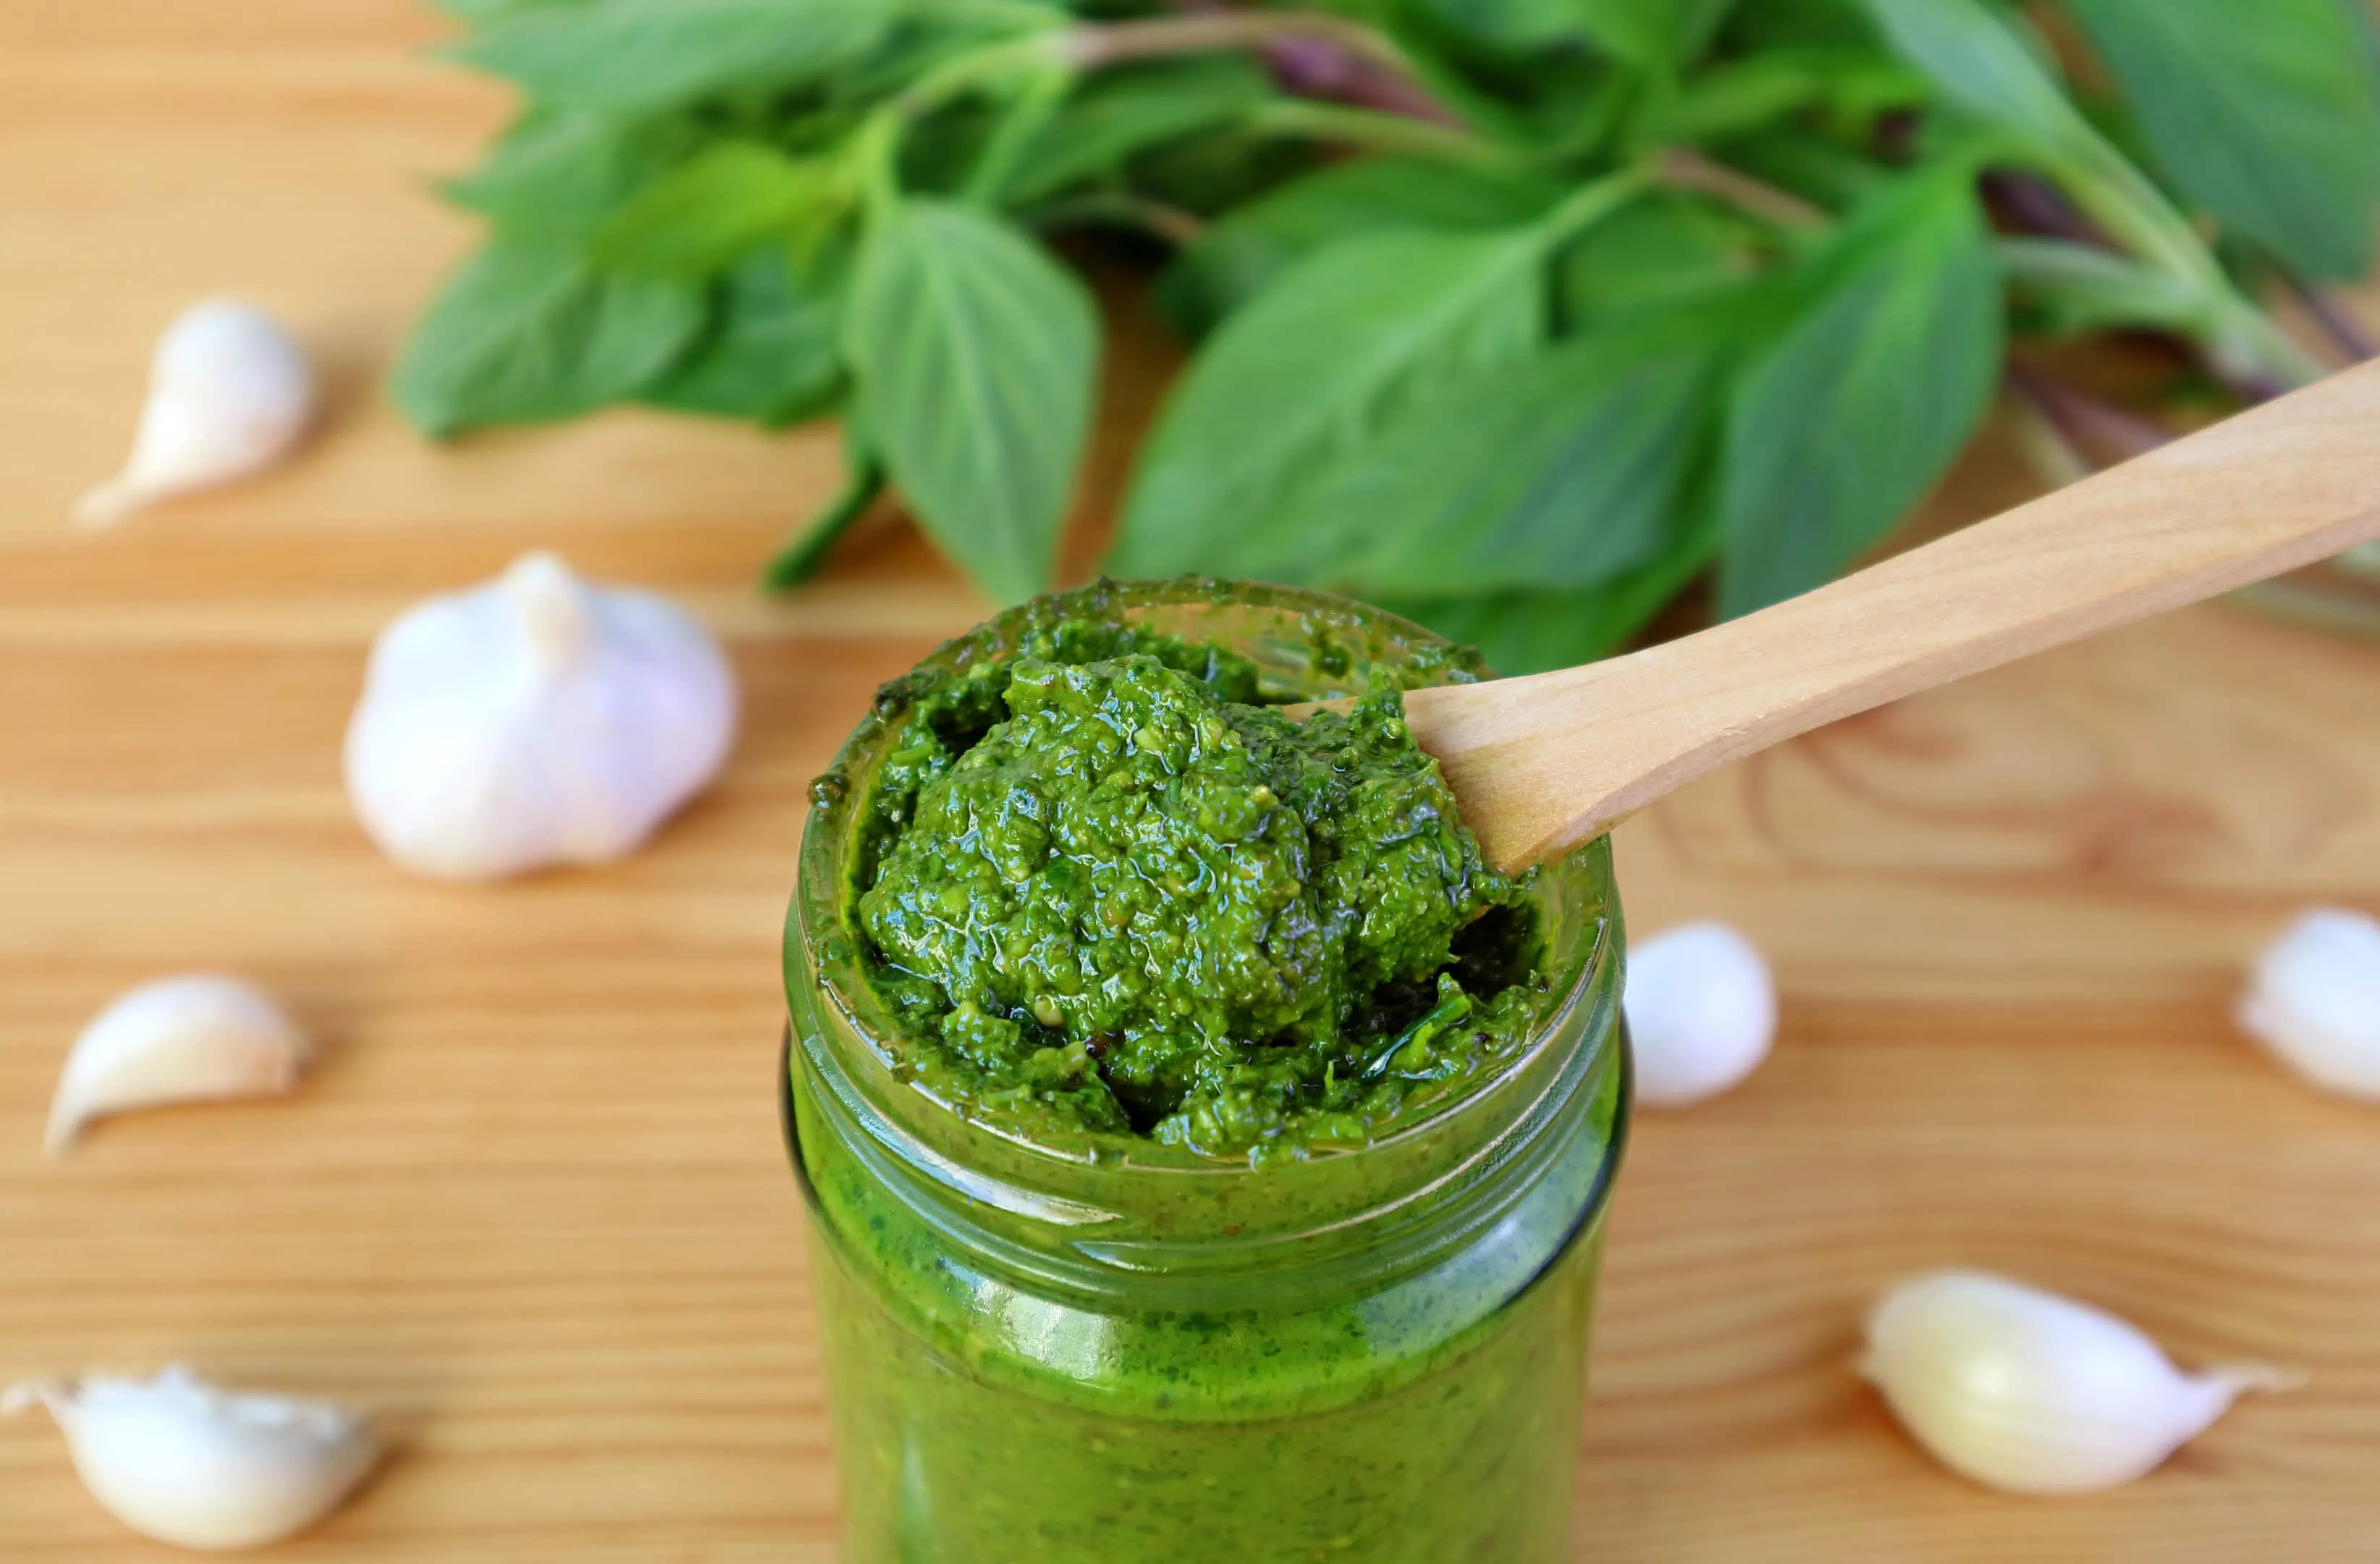 Our homemade fresh basil pesto recipe without pine nuts